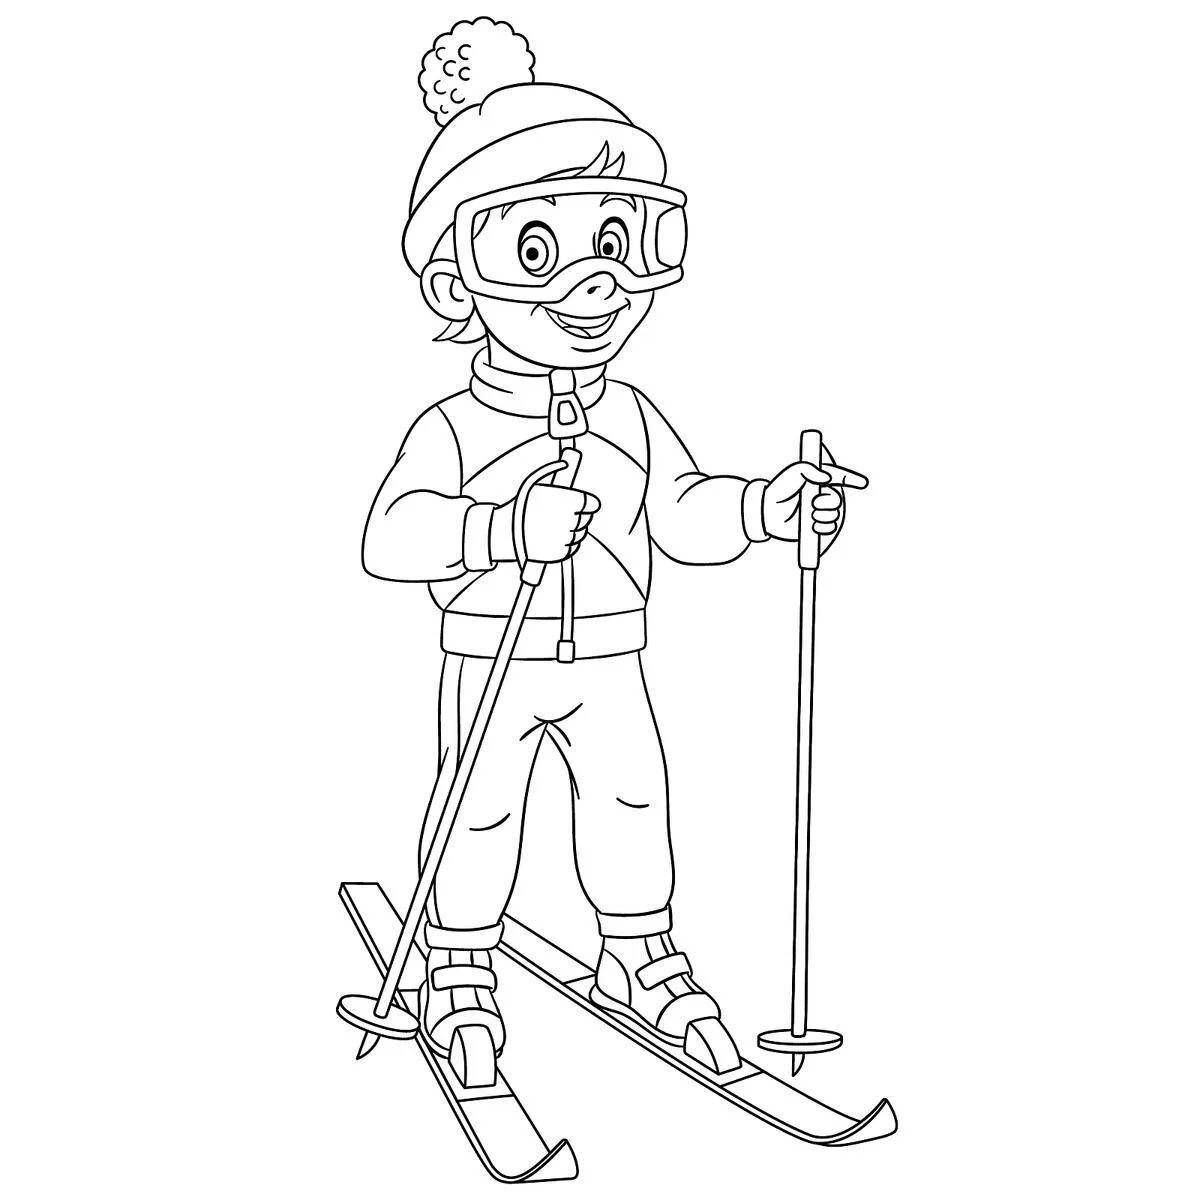 Animated boy skiing coloring page